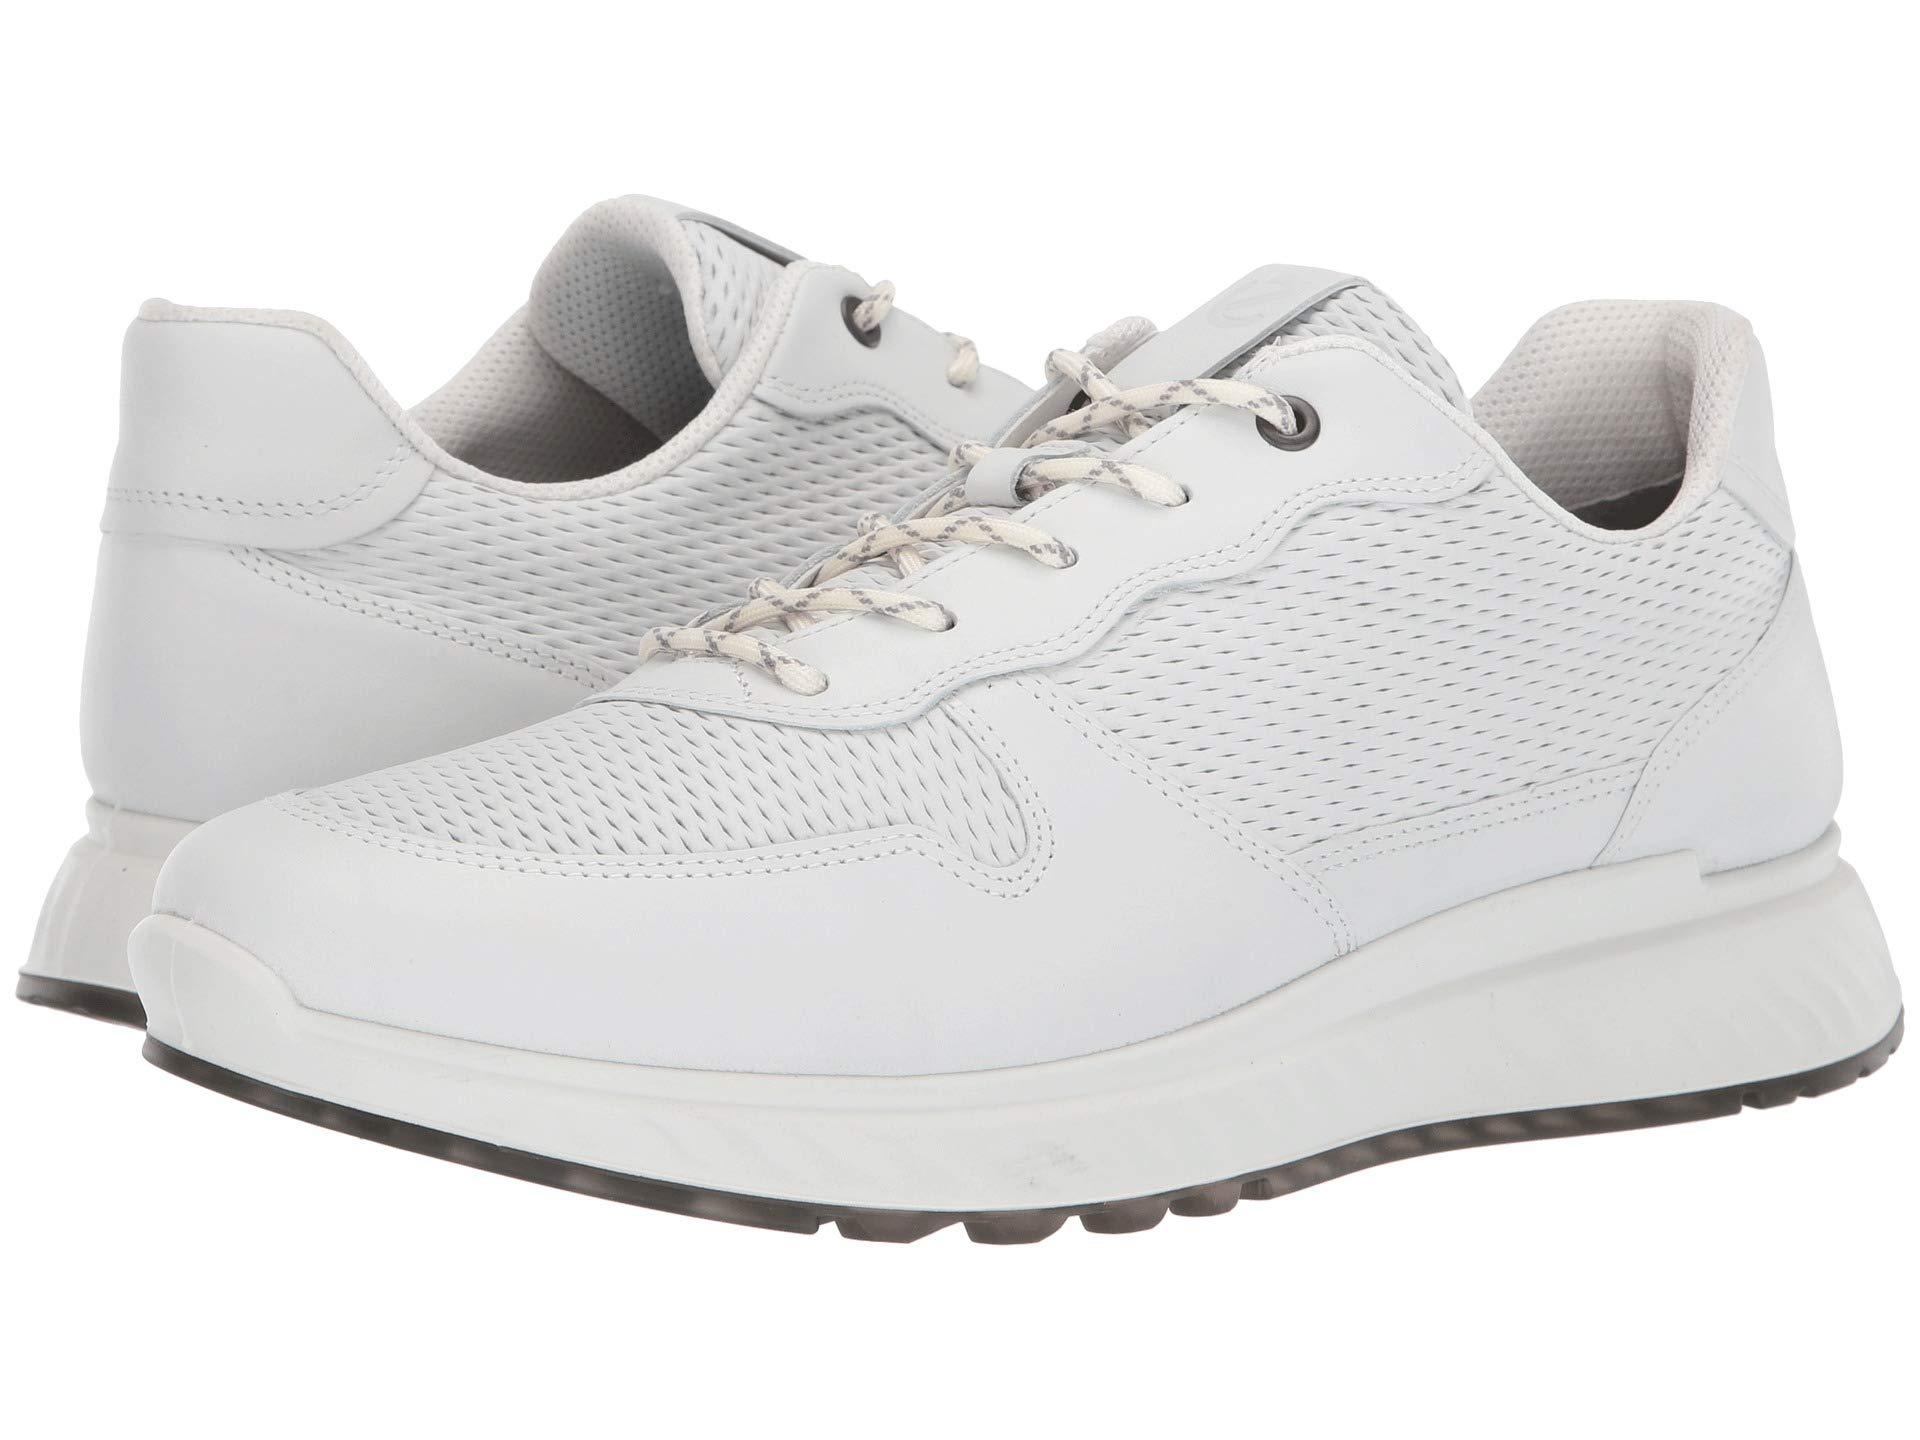 Ecco Leather St1 Perforated Sneaker in White for Men - Lyst